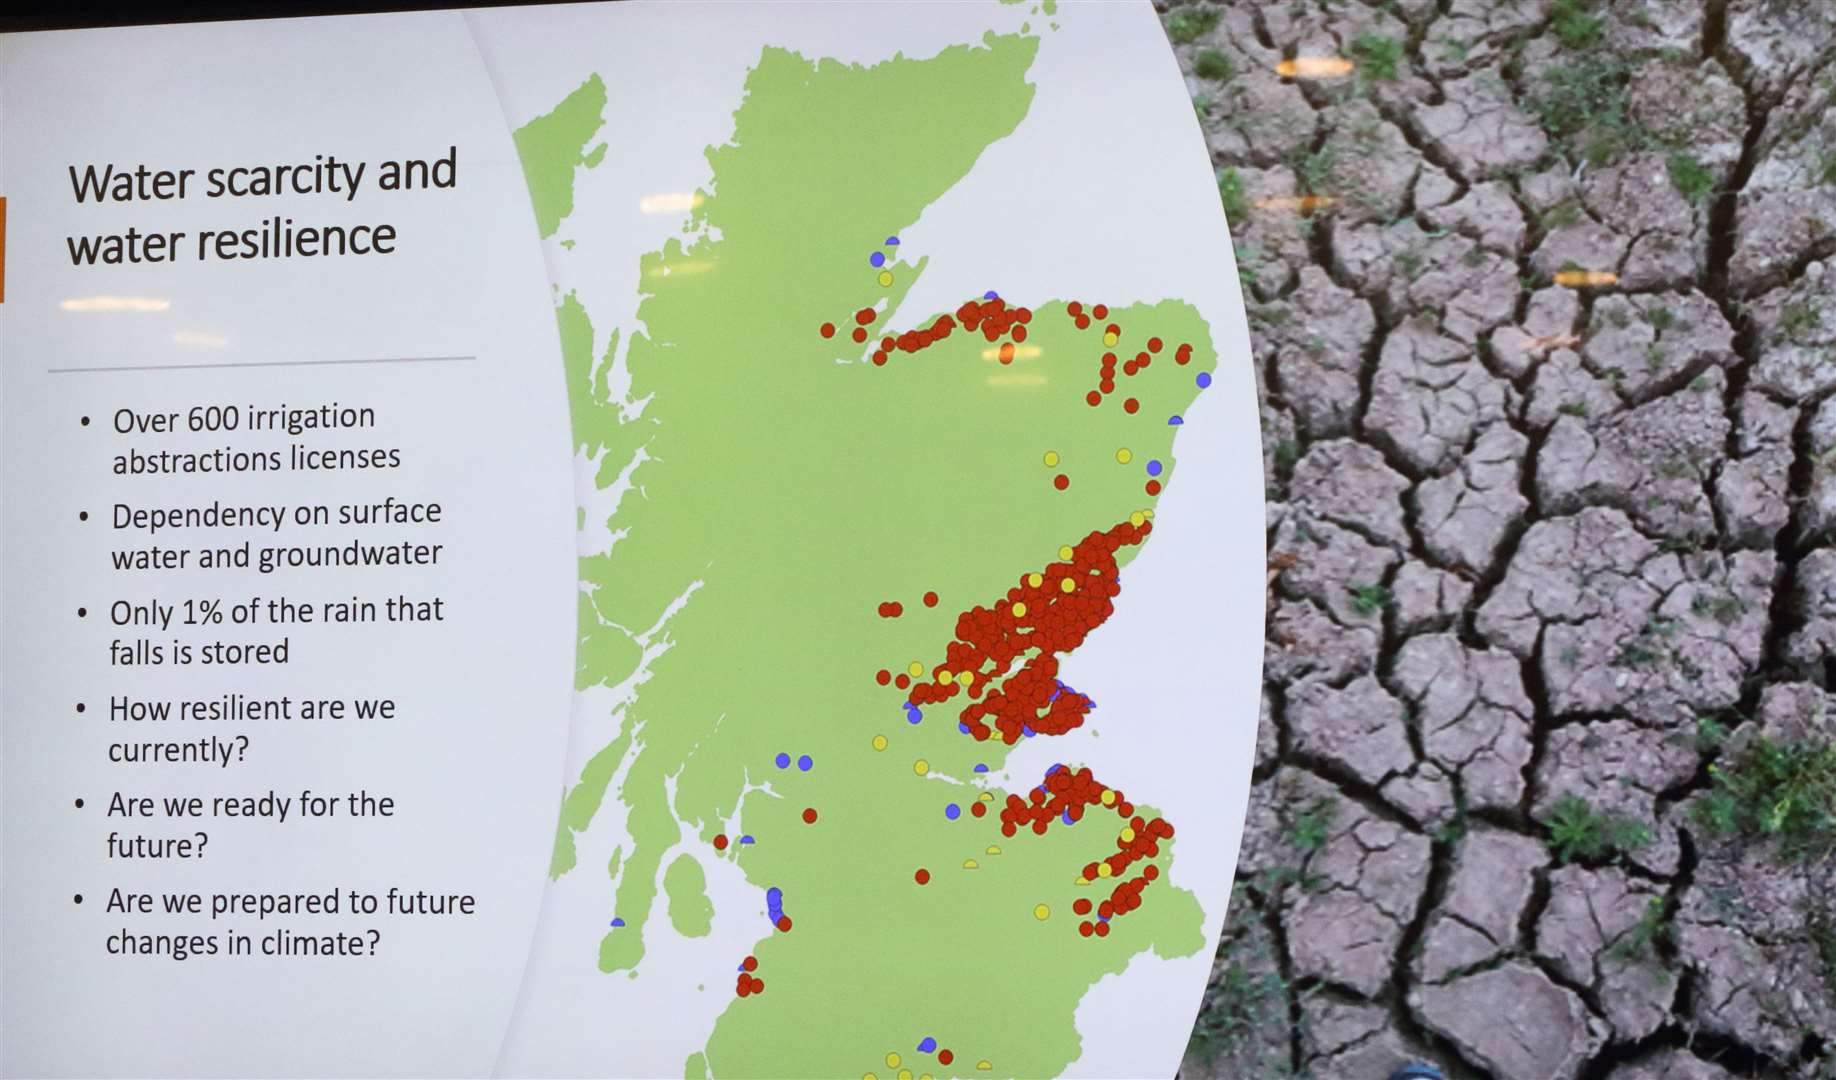 Extraction takes place at around 600 points across Scotland.